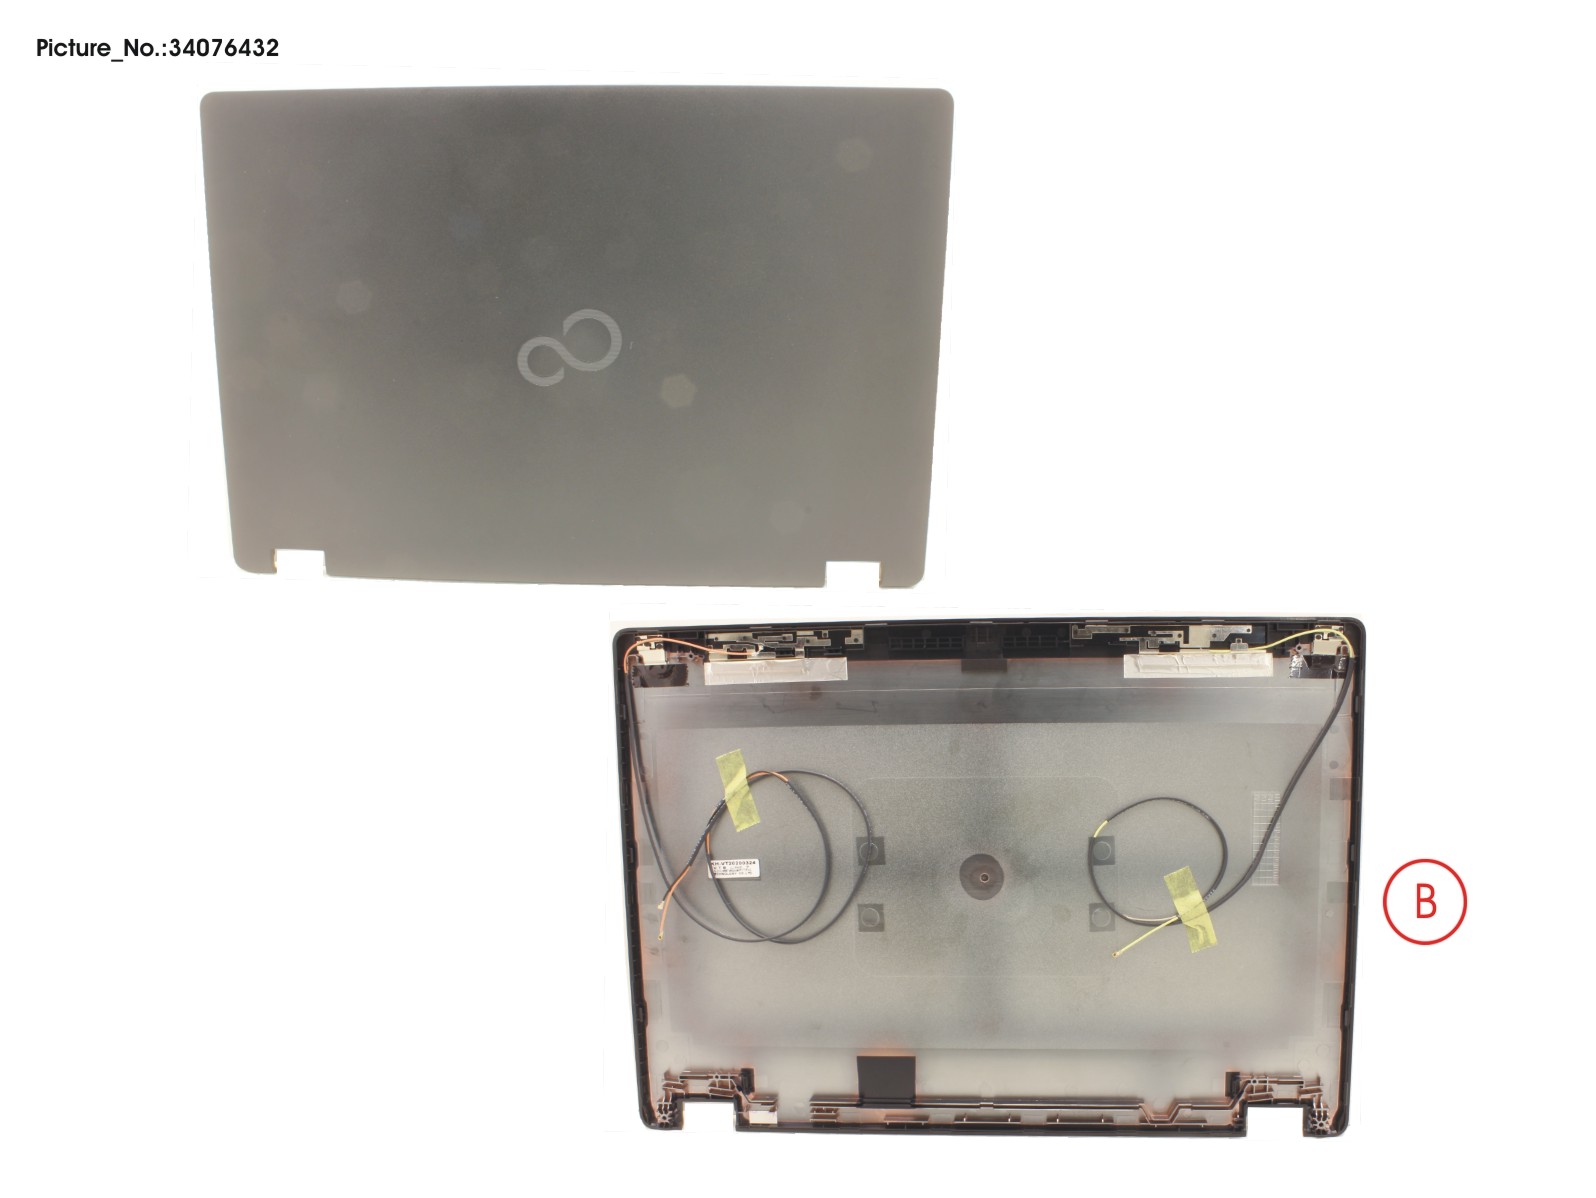 LCD BACK COVER ASSY (HD)